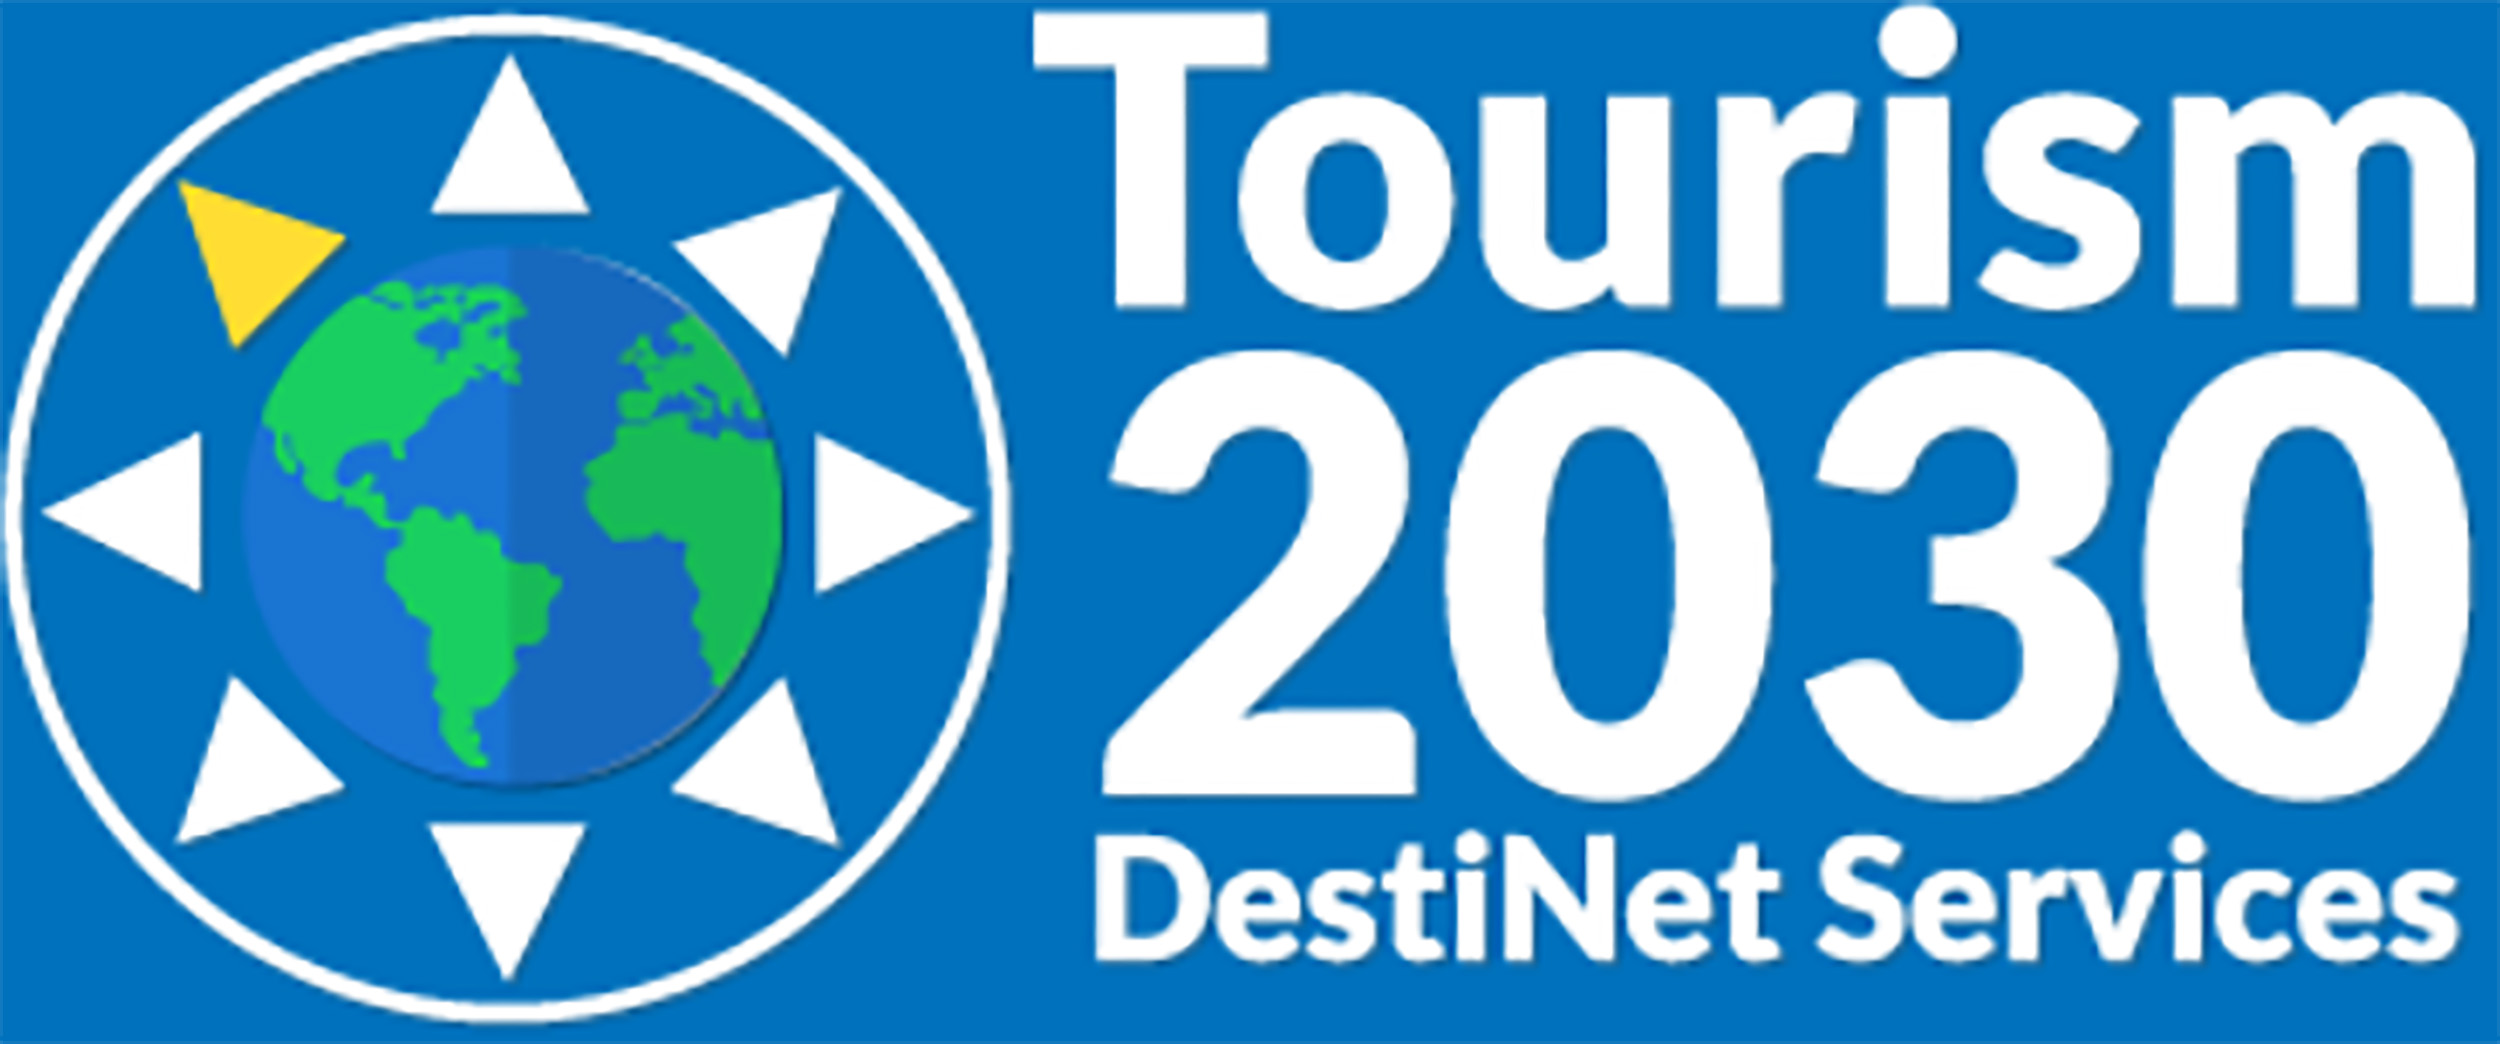 Tourism2030 - DestiNet Services: Knowledge networking portal for sustainable & responsible tourism